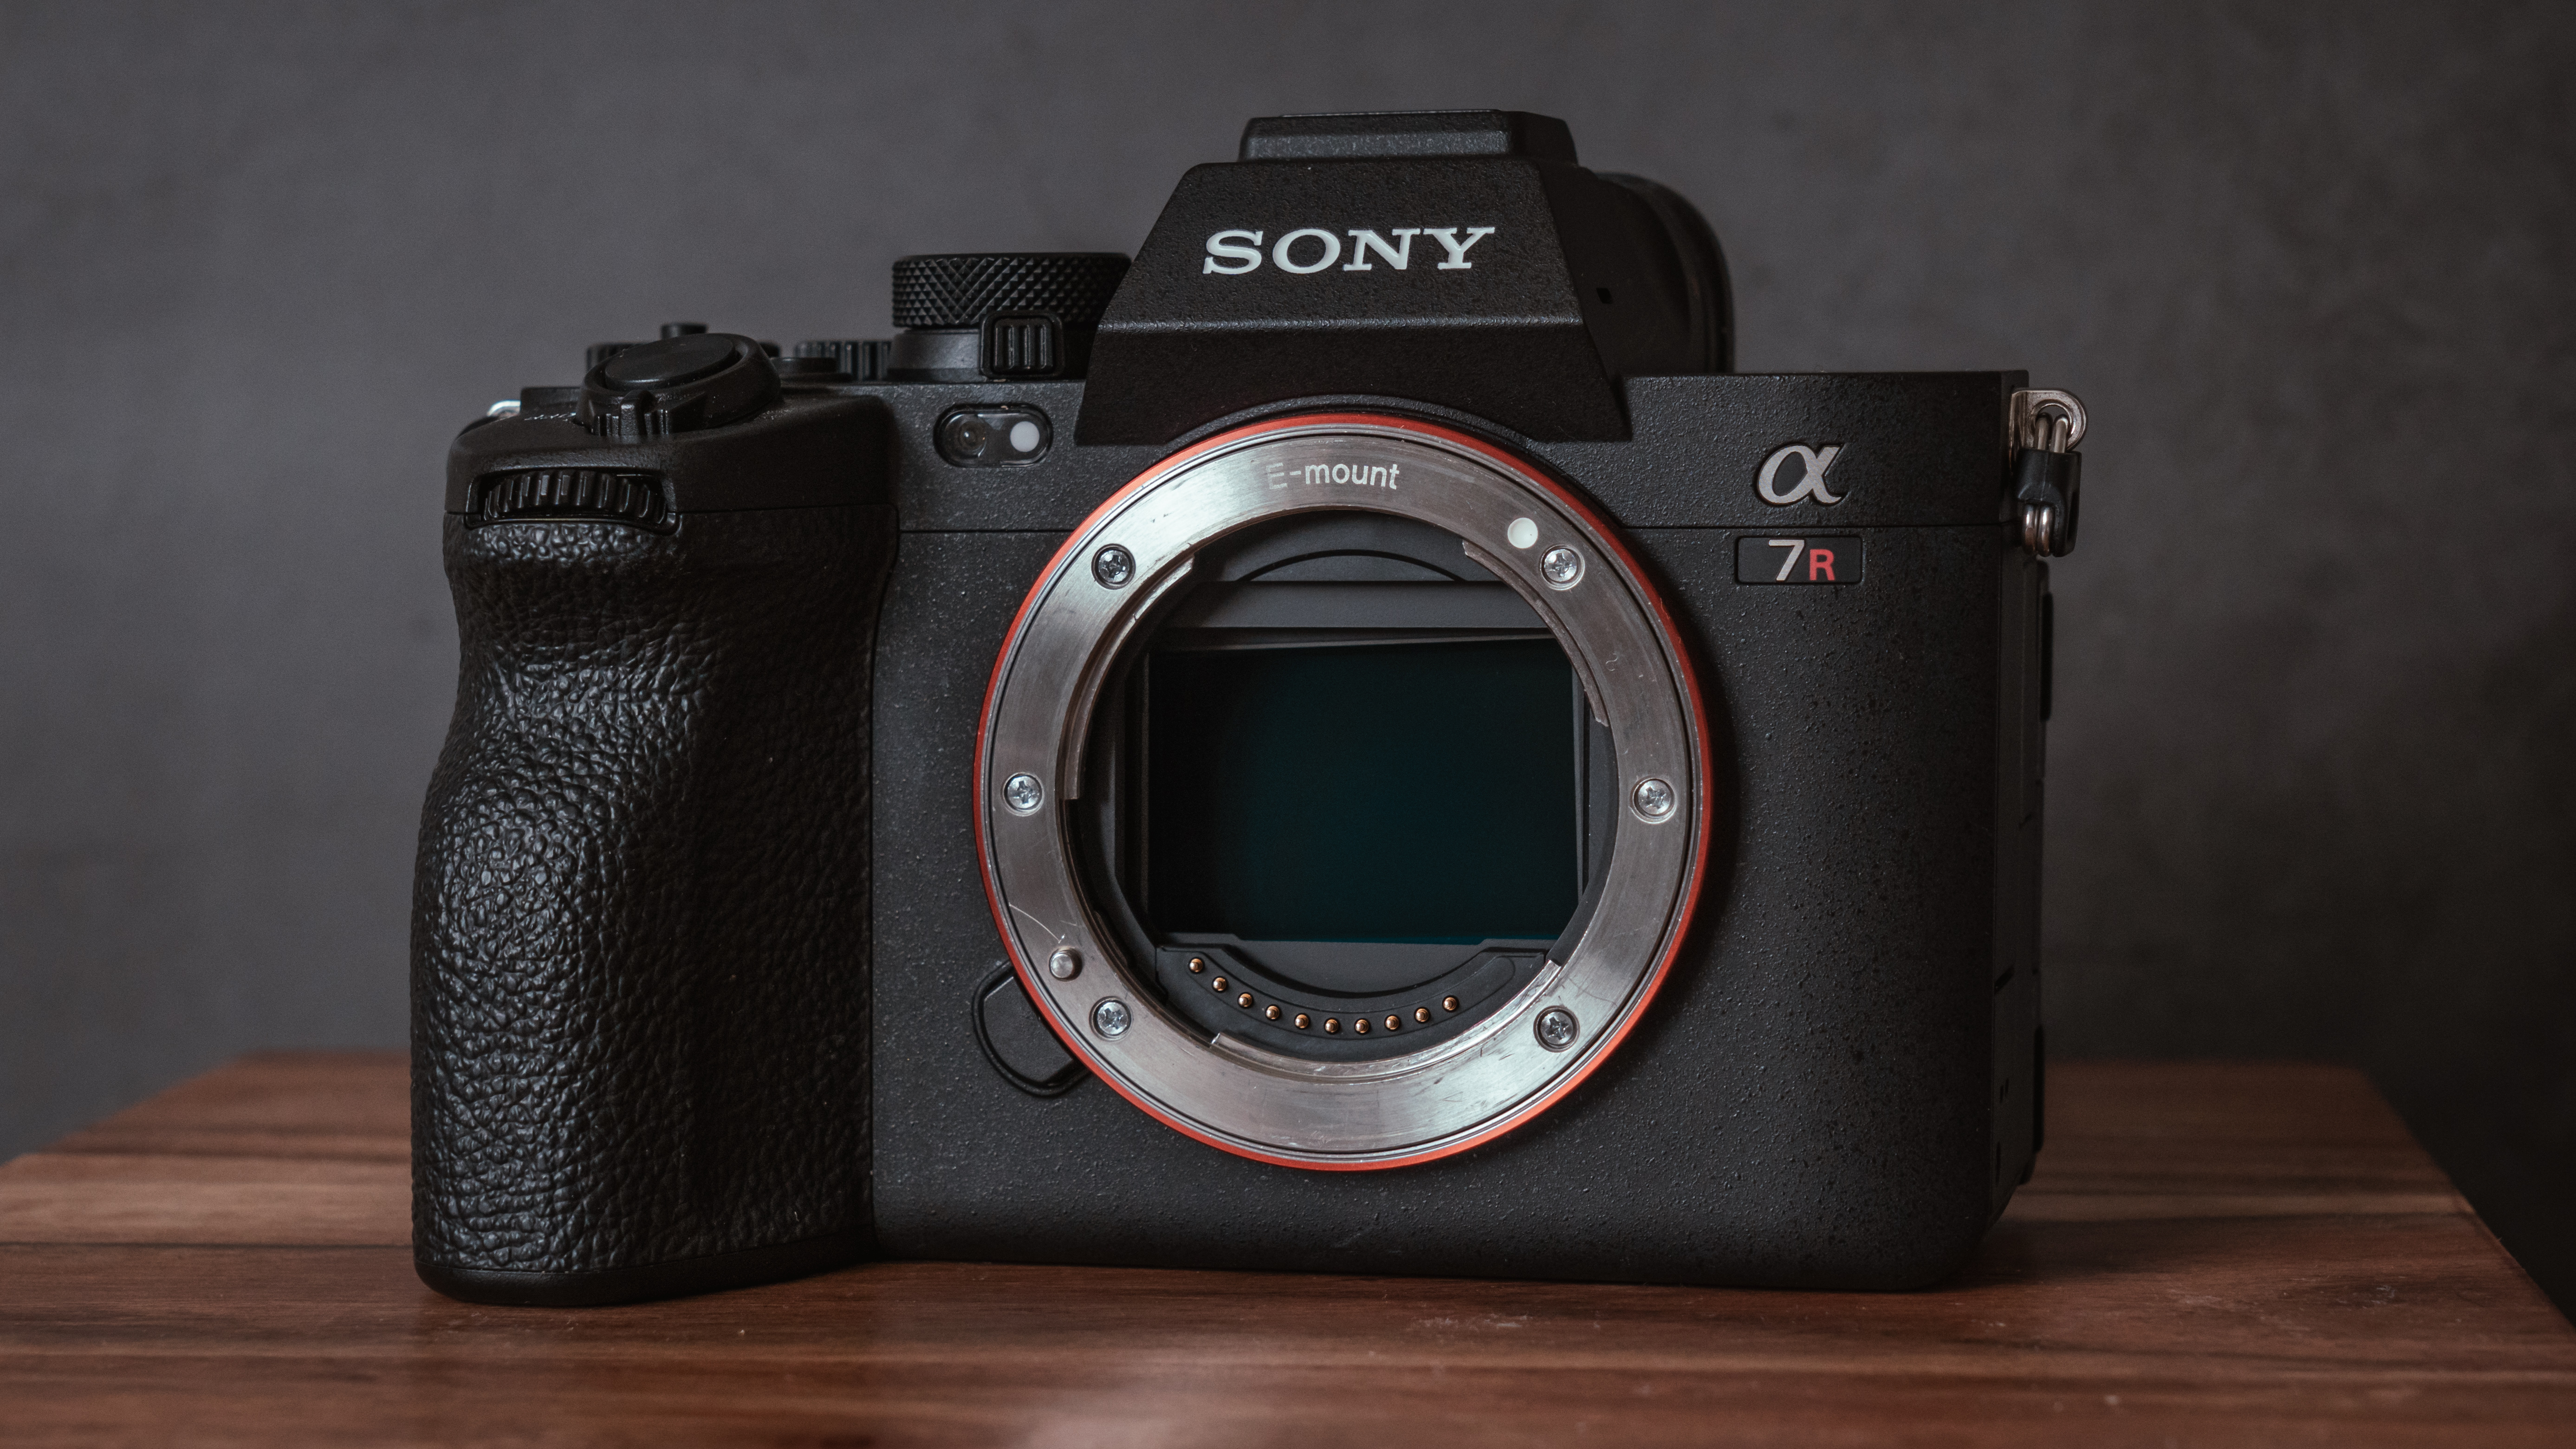 Sony A7R V camera body on a wooden surface with a gray background